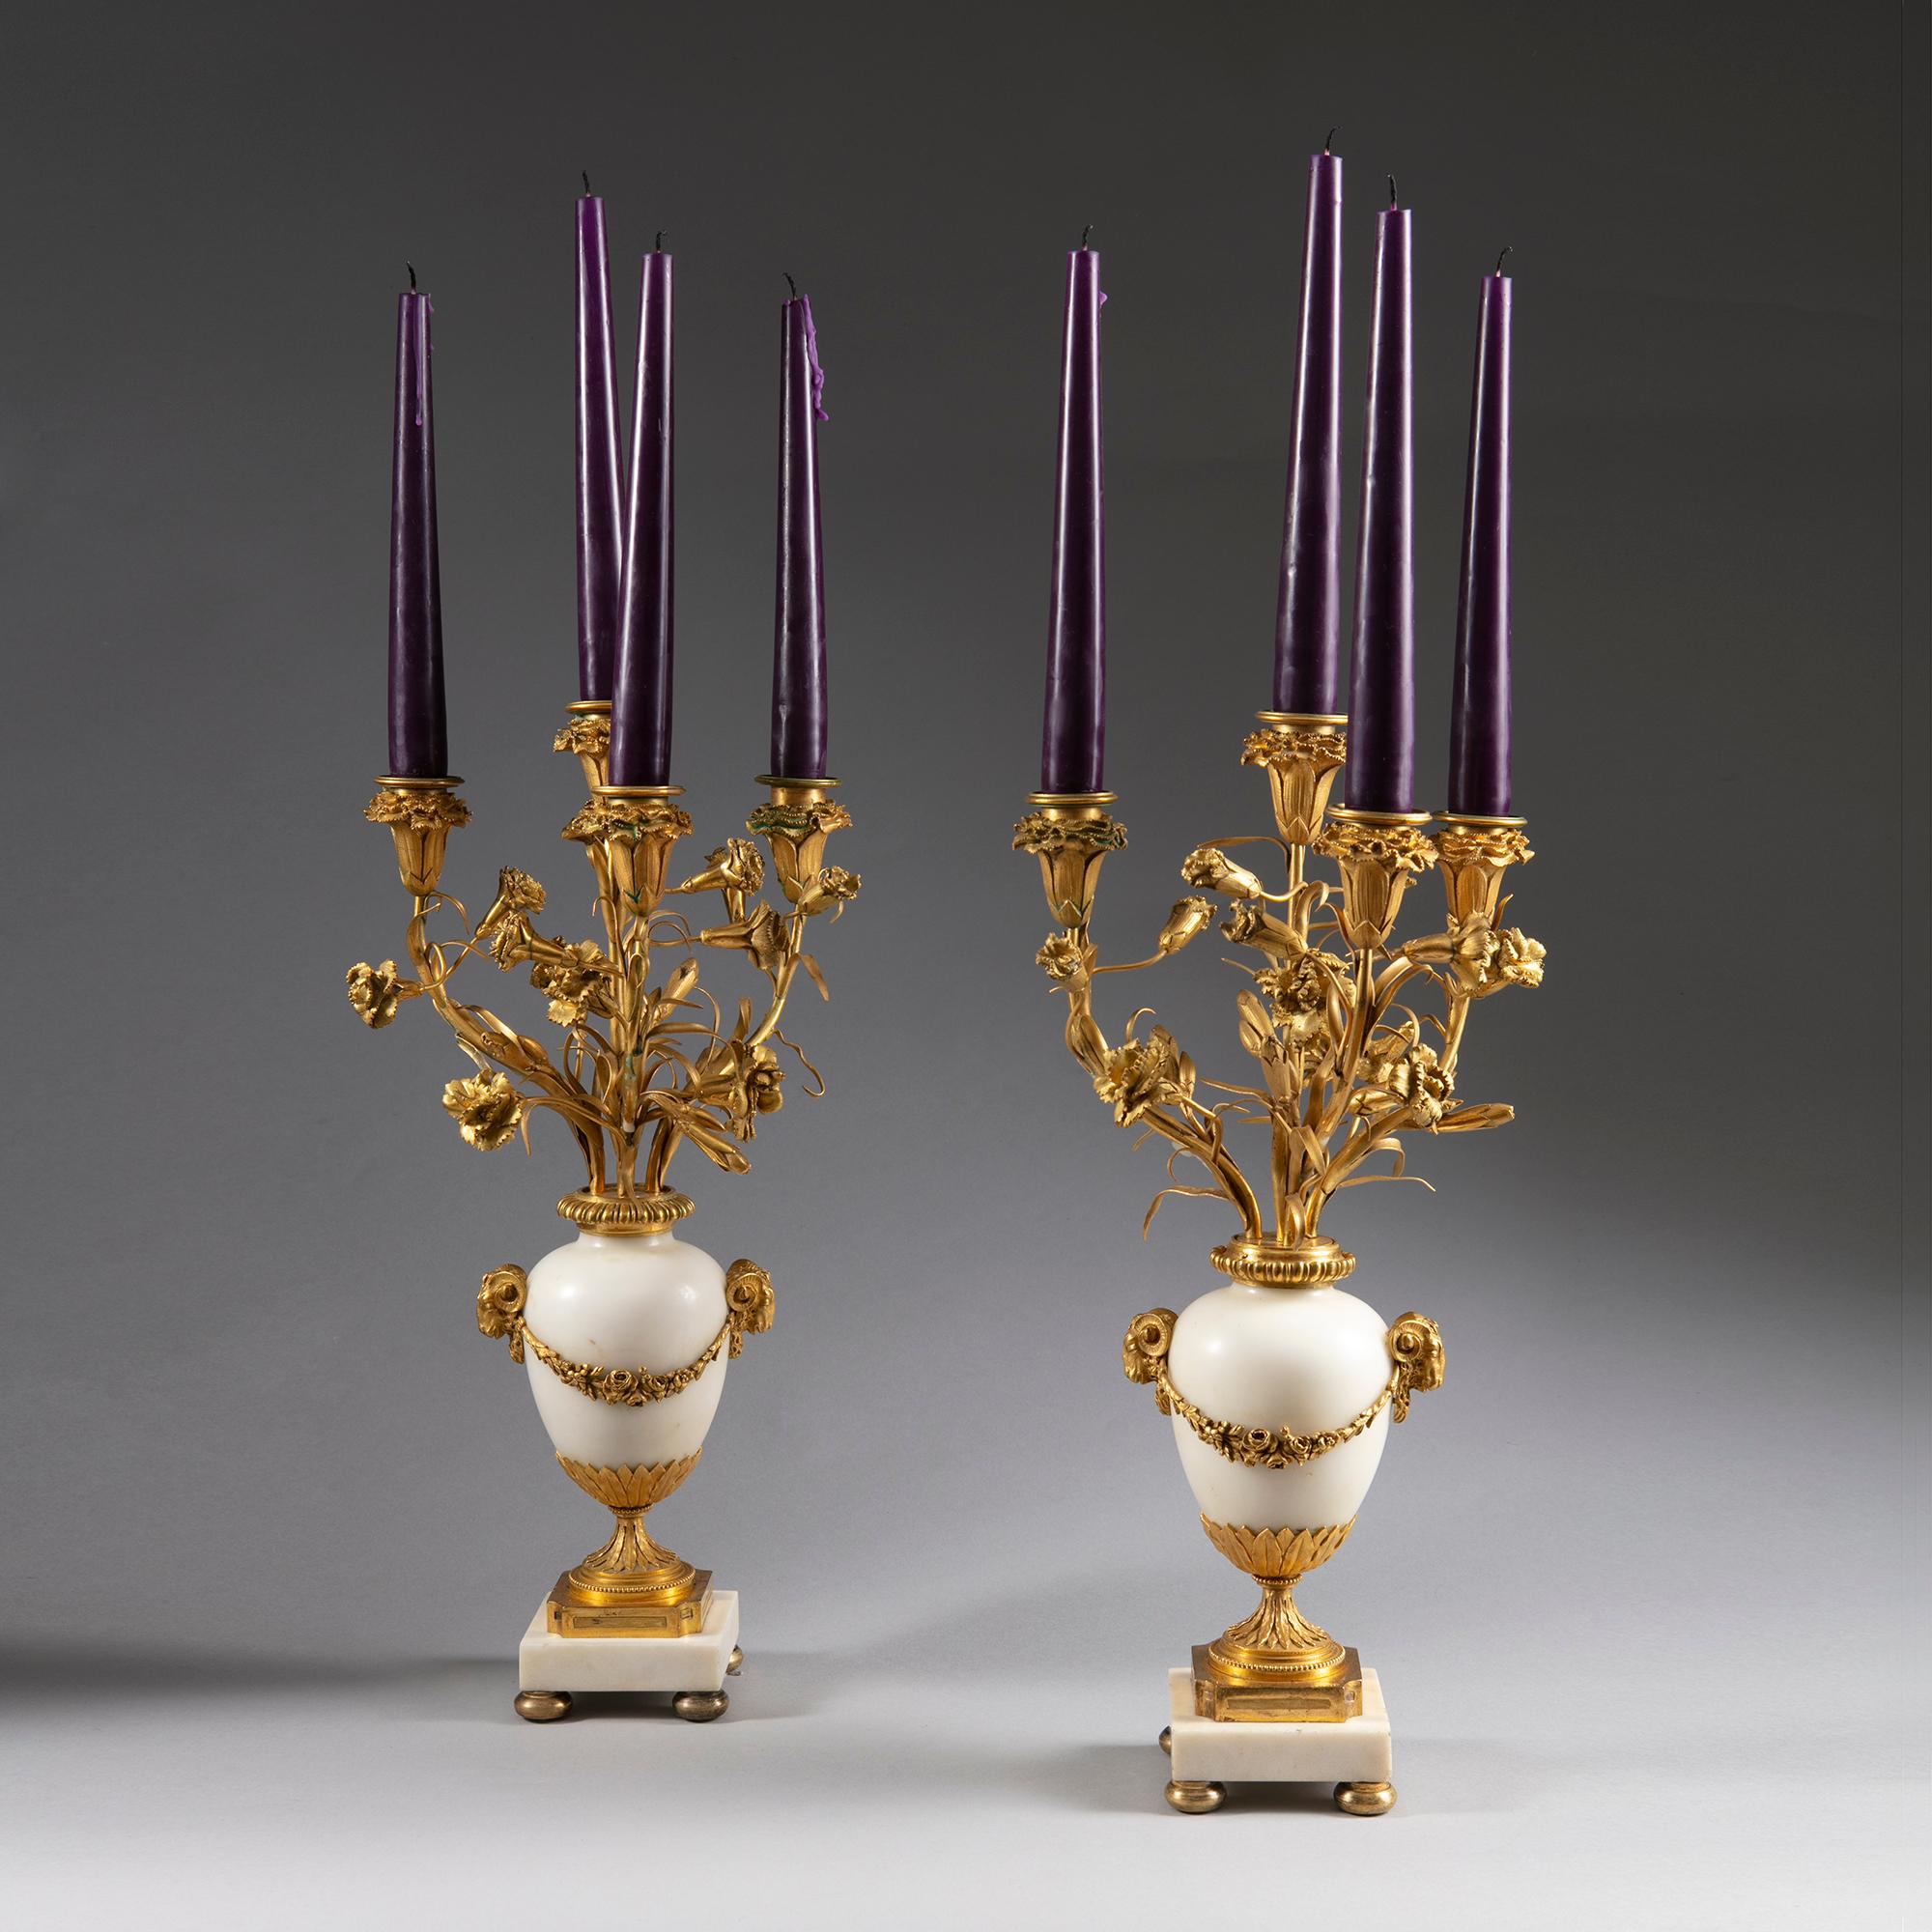 Pair of late 19th century neoclassical ormolu gold and white marble candelabra

Each with four arms issuing from gilt bronze carnation flowers

Raised on classical white marble bodies with classical gilt bronze mounts

Rams heads symbolise